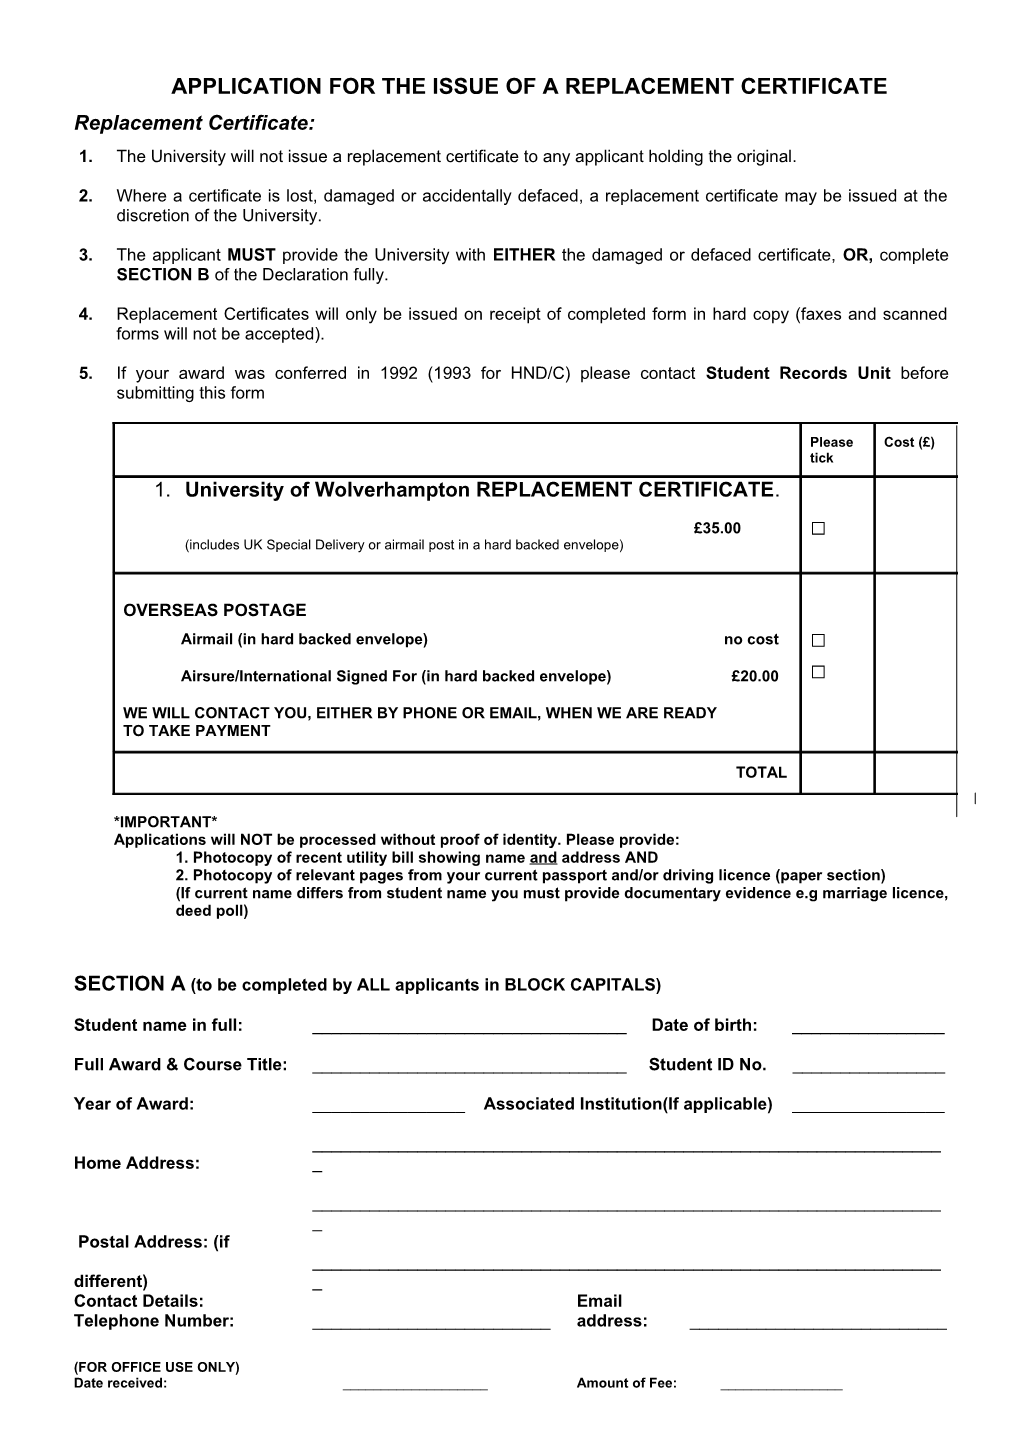 Application for the Issue of a Replacement Certificate